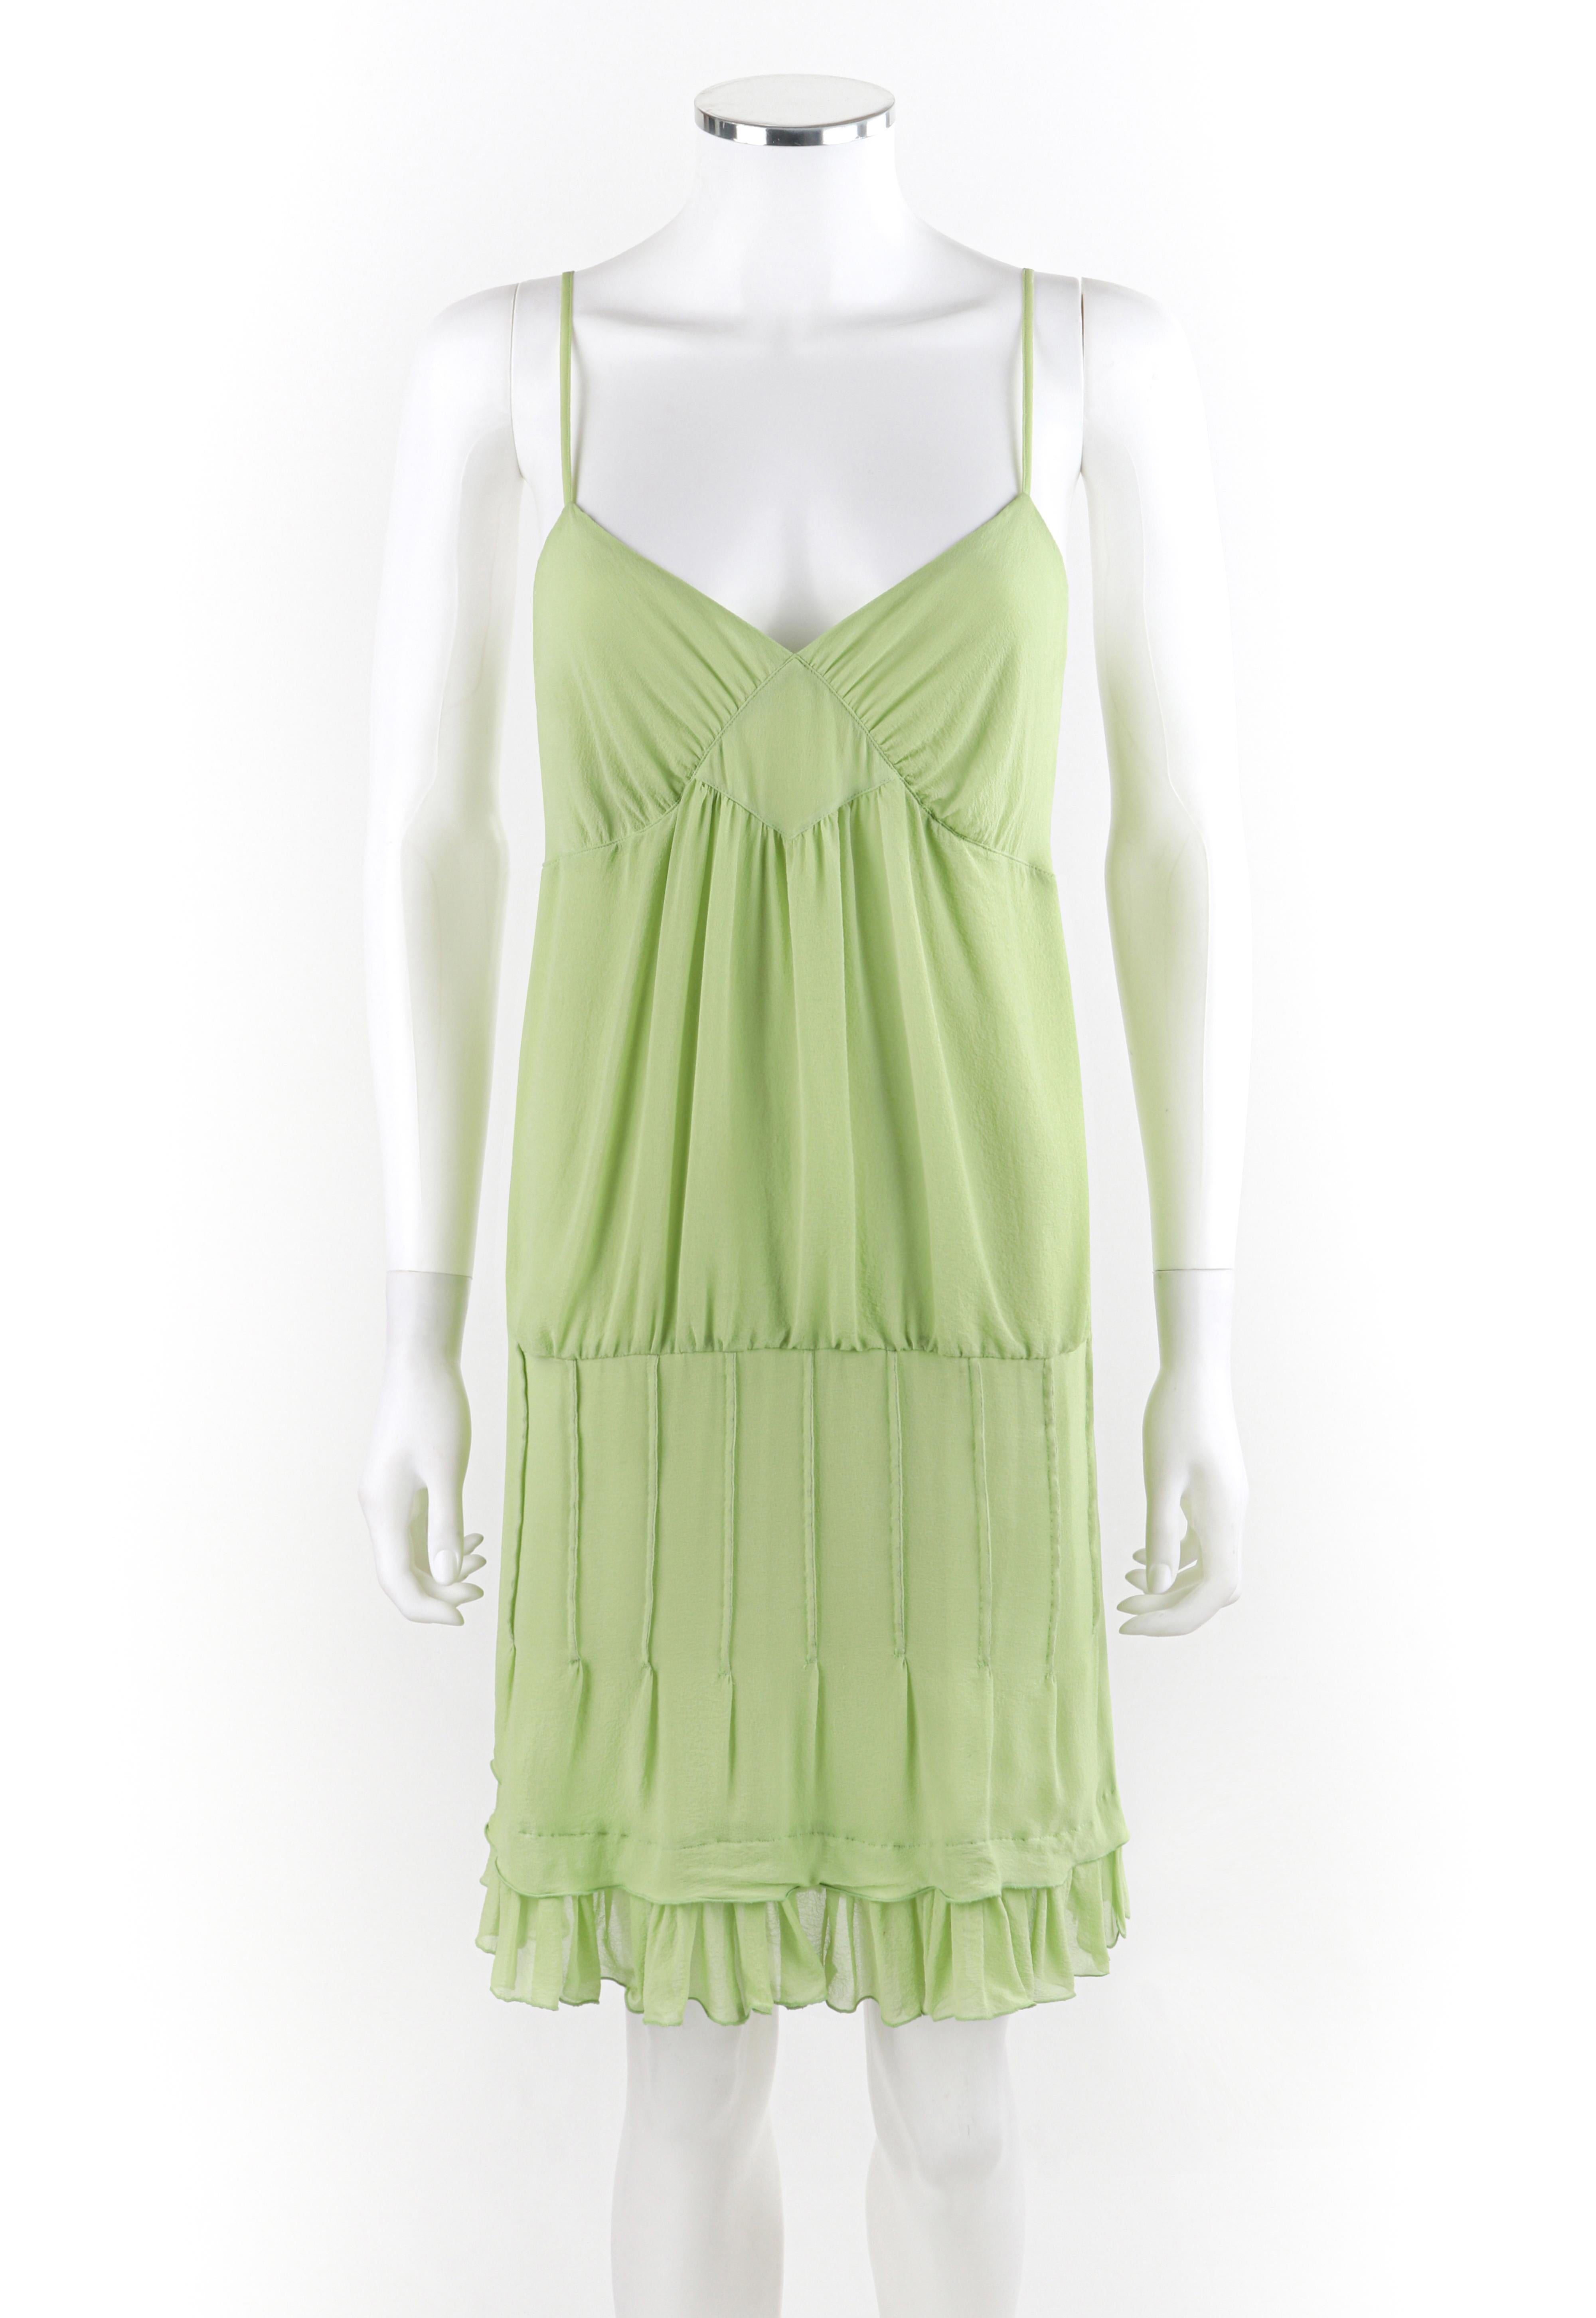 ALEXANDER MCQUEEN S/S 1996 Chartreuse Ruffles Tiered V-neck Pleated Sundress 
 
Brand / Manufacturer: Alexander McQueen
Collection: S/S 1996
Style: Tiered Sundress
Color(s): Chartreuse 
Lined: No
Marked Fabric Content: Silk
Additional Details /